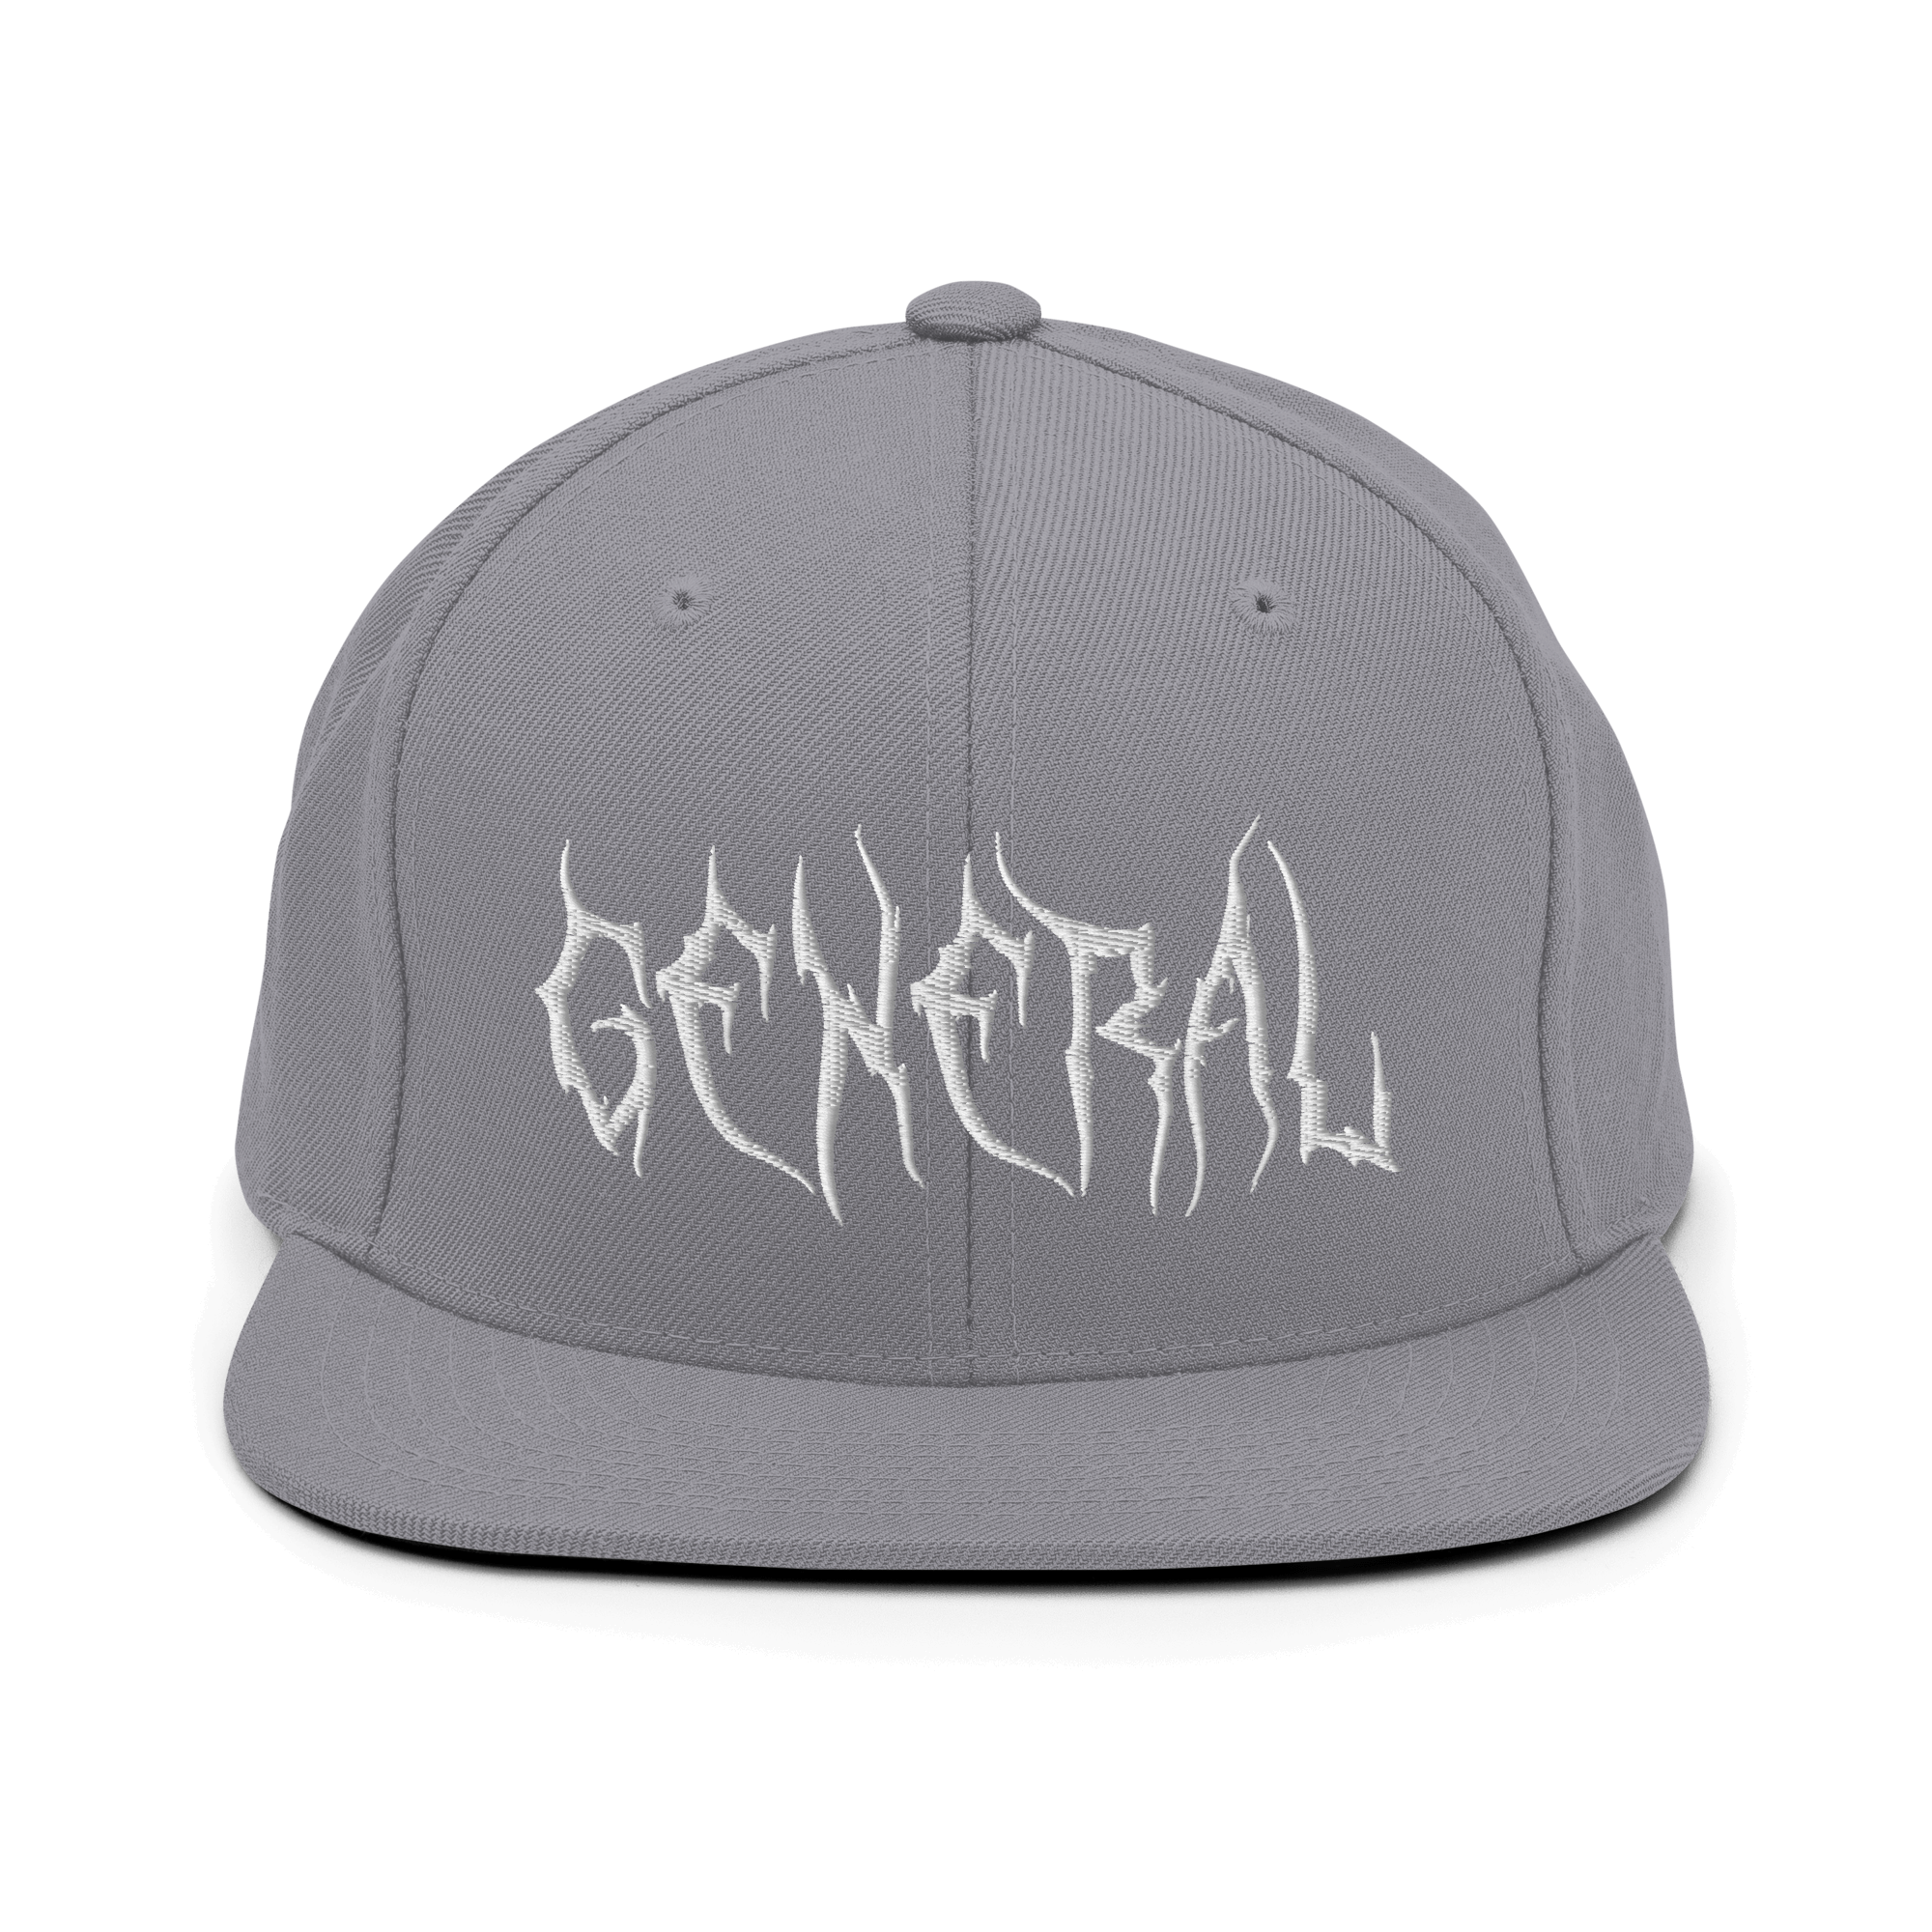 General Snapback CapCommand attention with the General Snapback Cap – a classic fit, flat brim, and full buckram structure for timeless appeal. The adjustable snap closure ensures comfort in a one-size-fits-most design. Crafted exclusively for you upon or